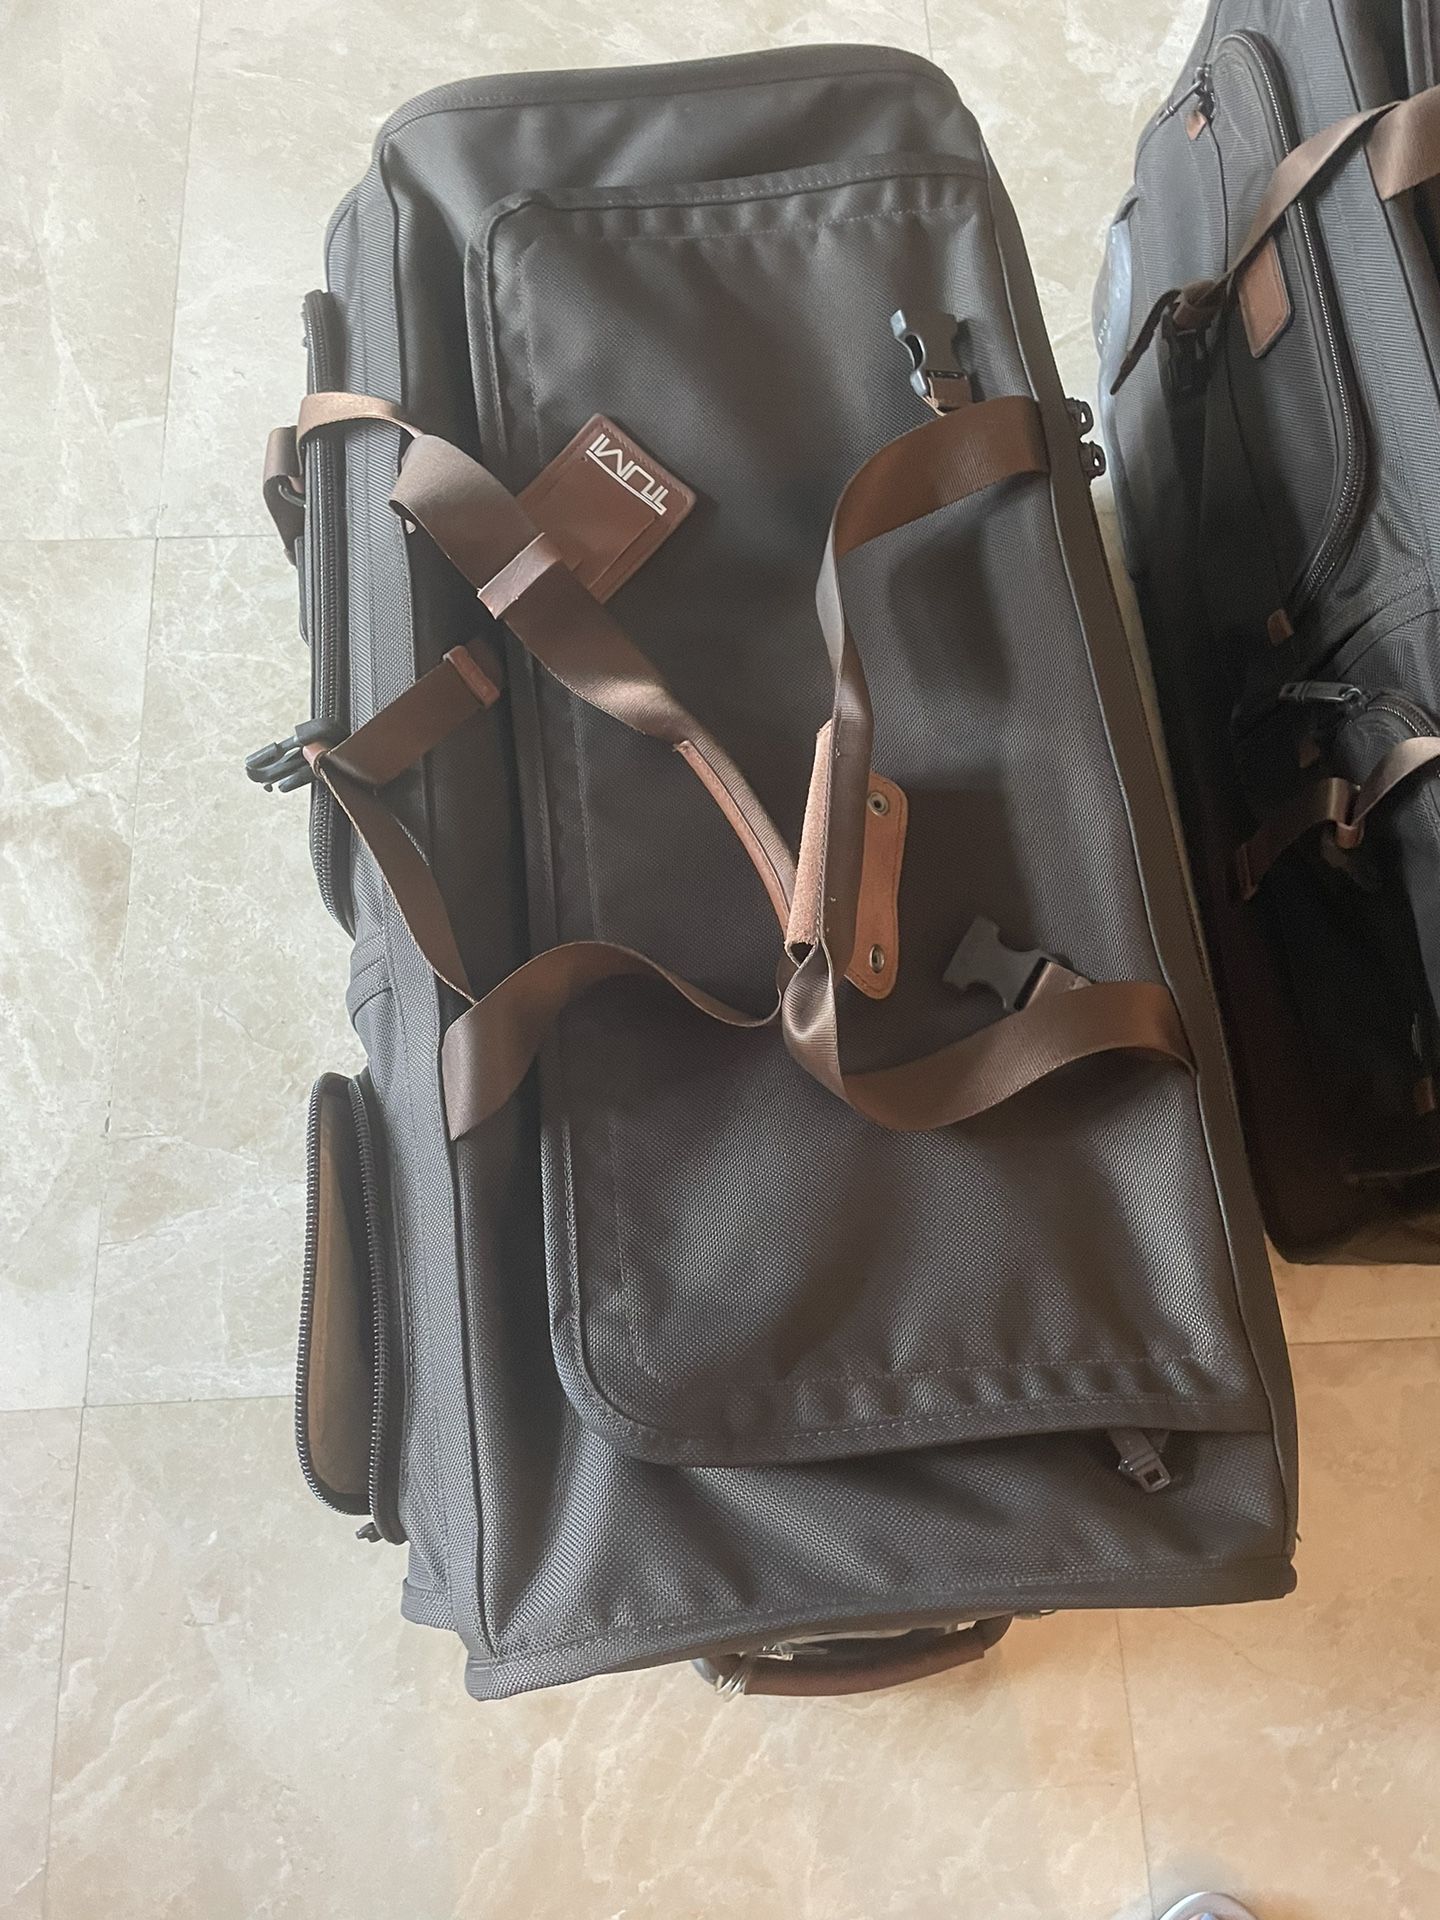 Barely Used Tumi Luggage Set for Sale in Hollywood, FL - OfferUp